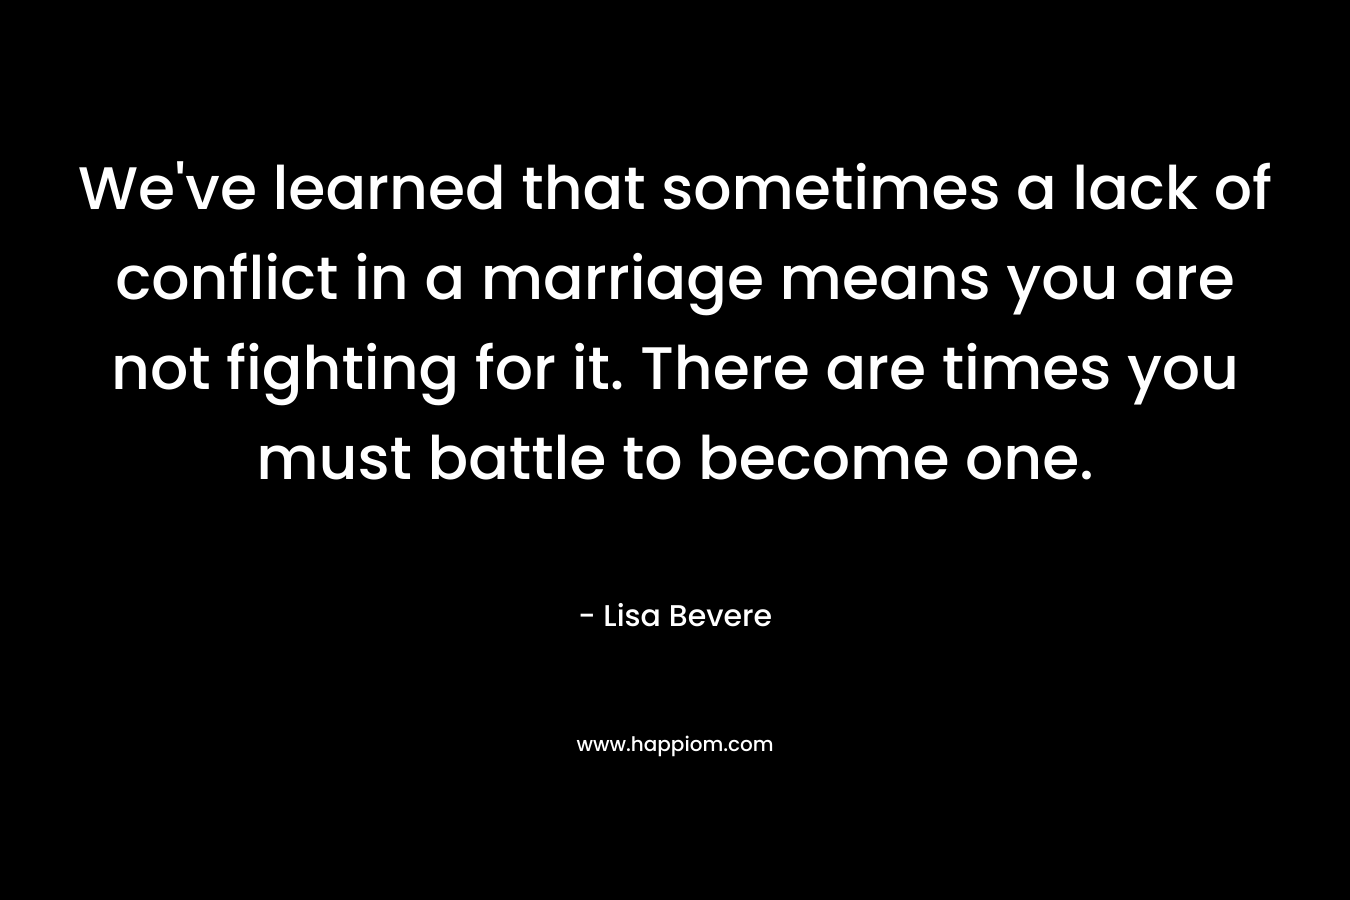 We've learned that sometimes a lack of conflict in a marriage means you are not fighting for it. There are times you must battle to become one.